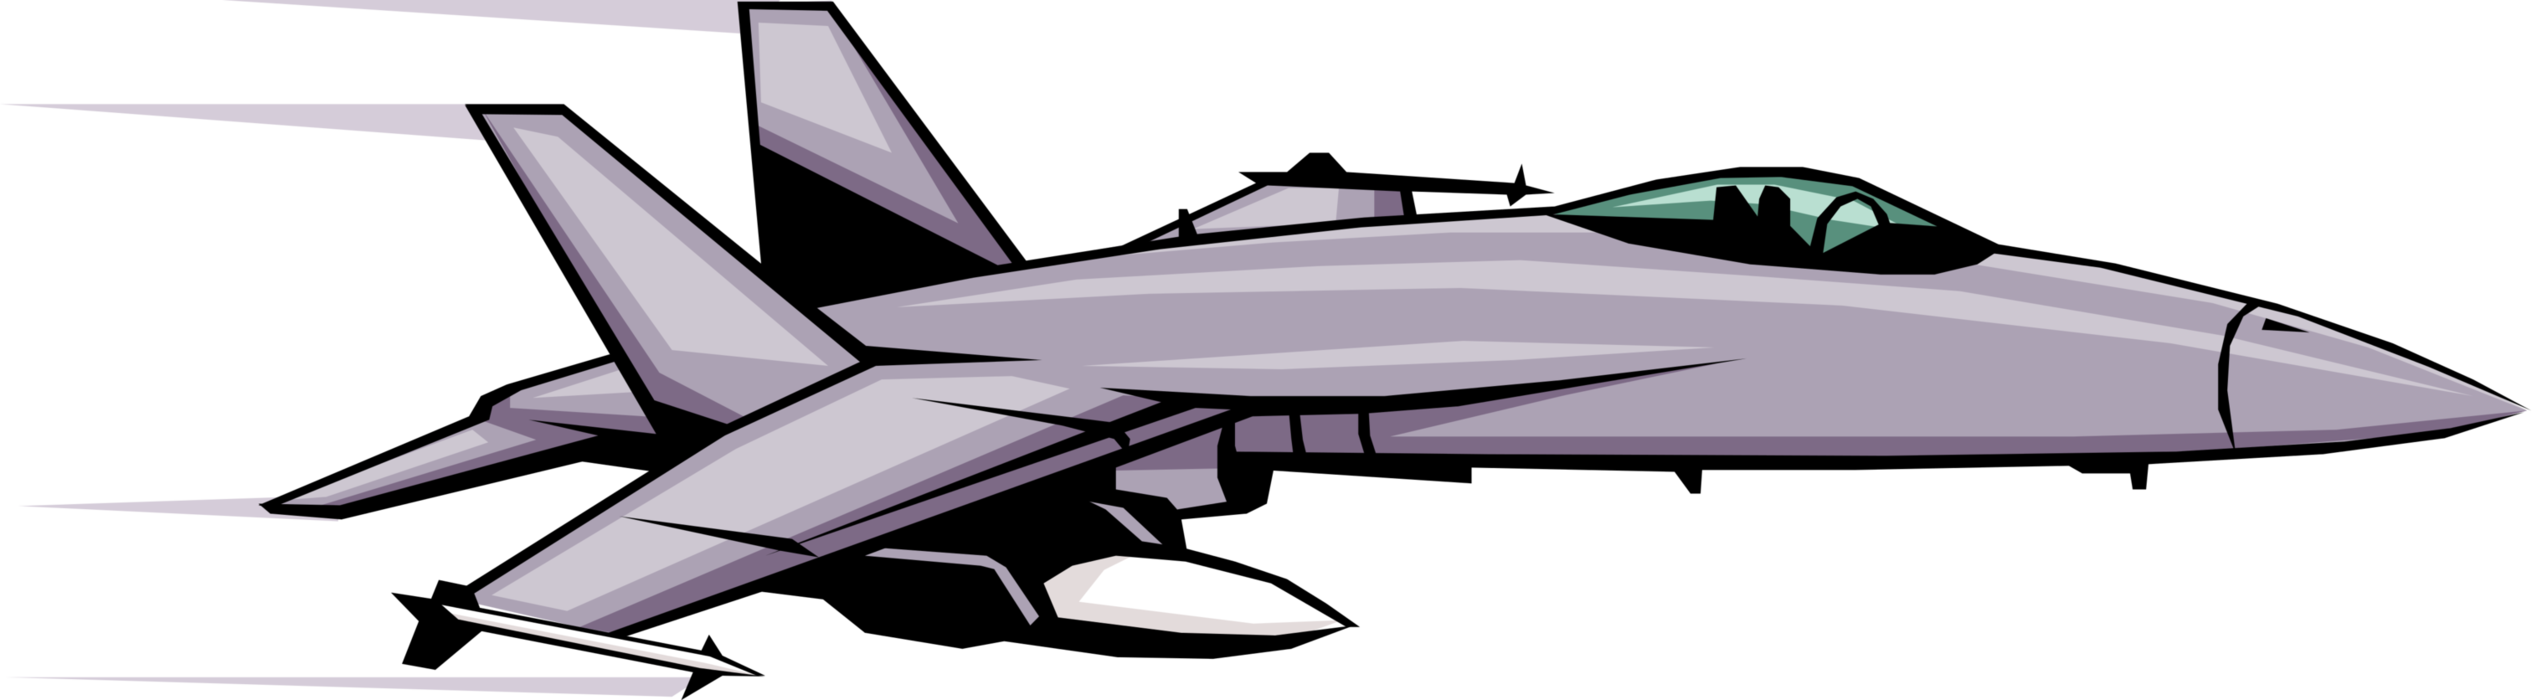 Vector Illustration of F18 Hornet US Navy and Marines Twin-Engine Supersonic Fighter and Attack Aircraft